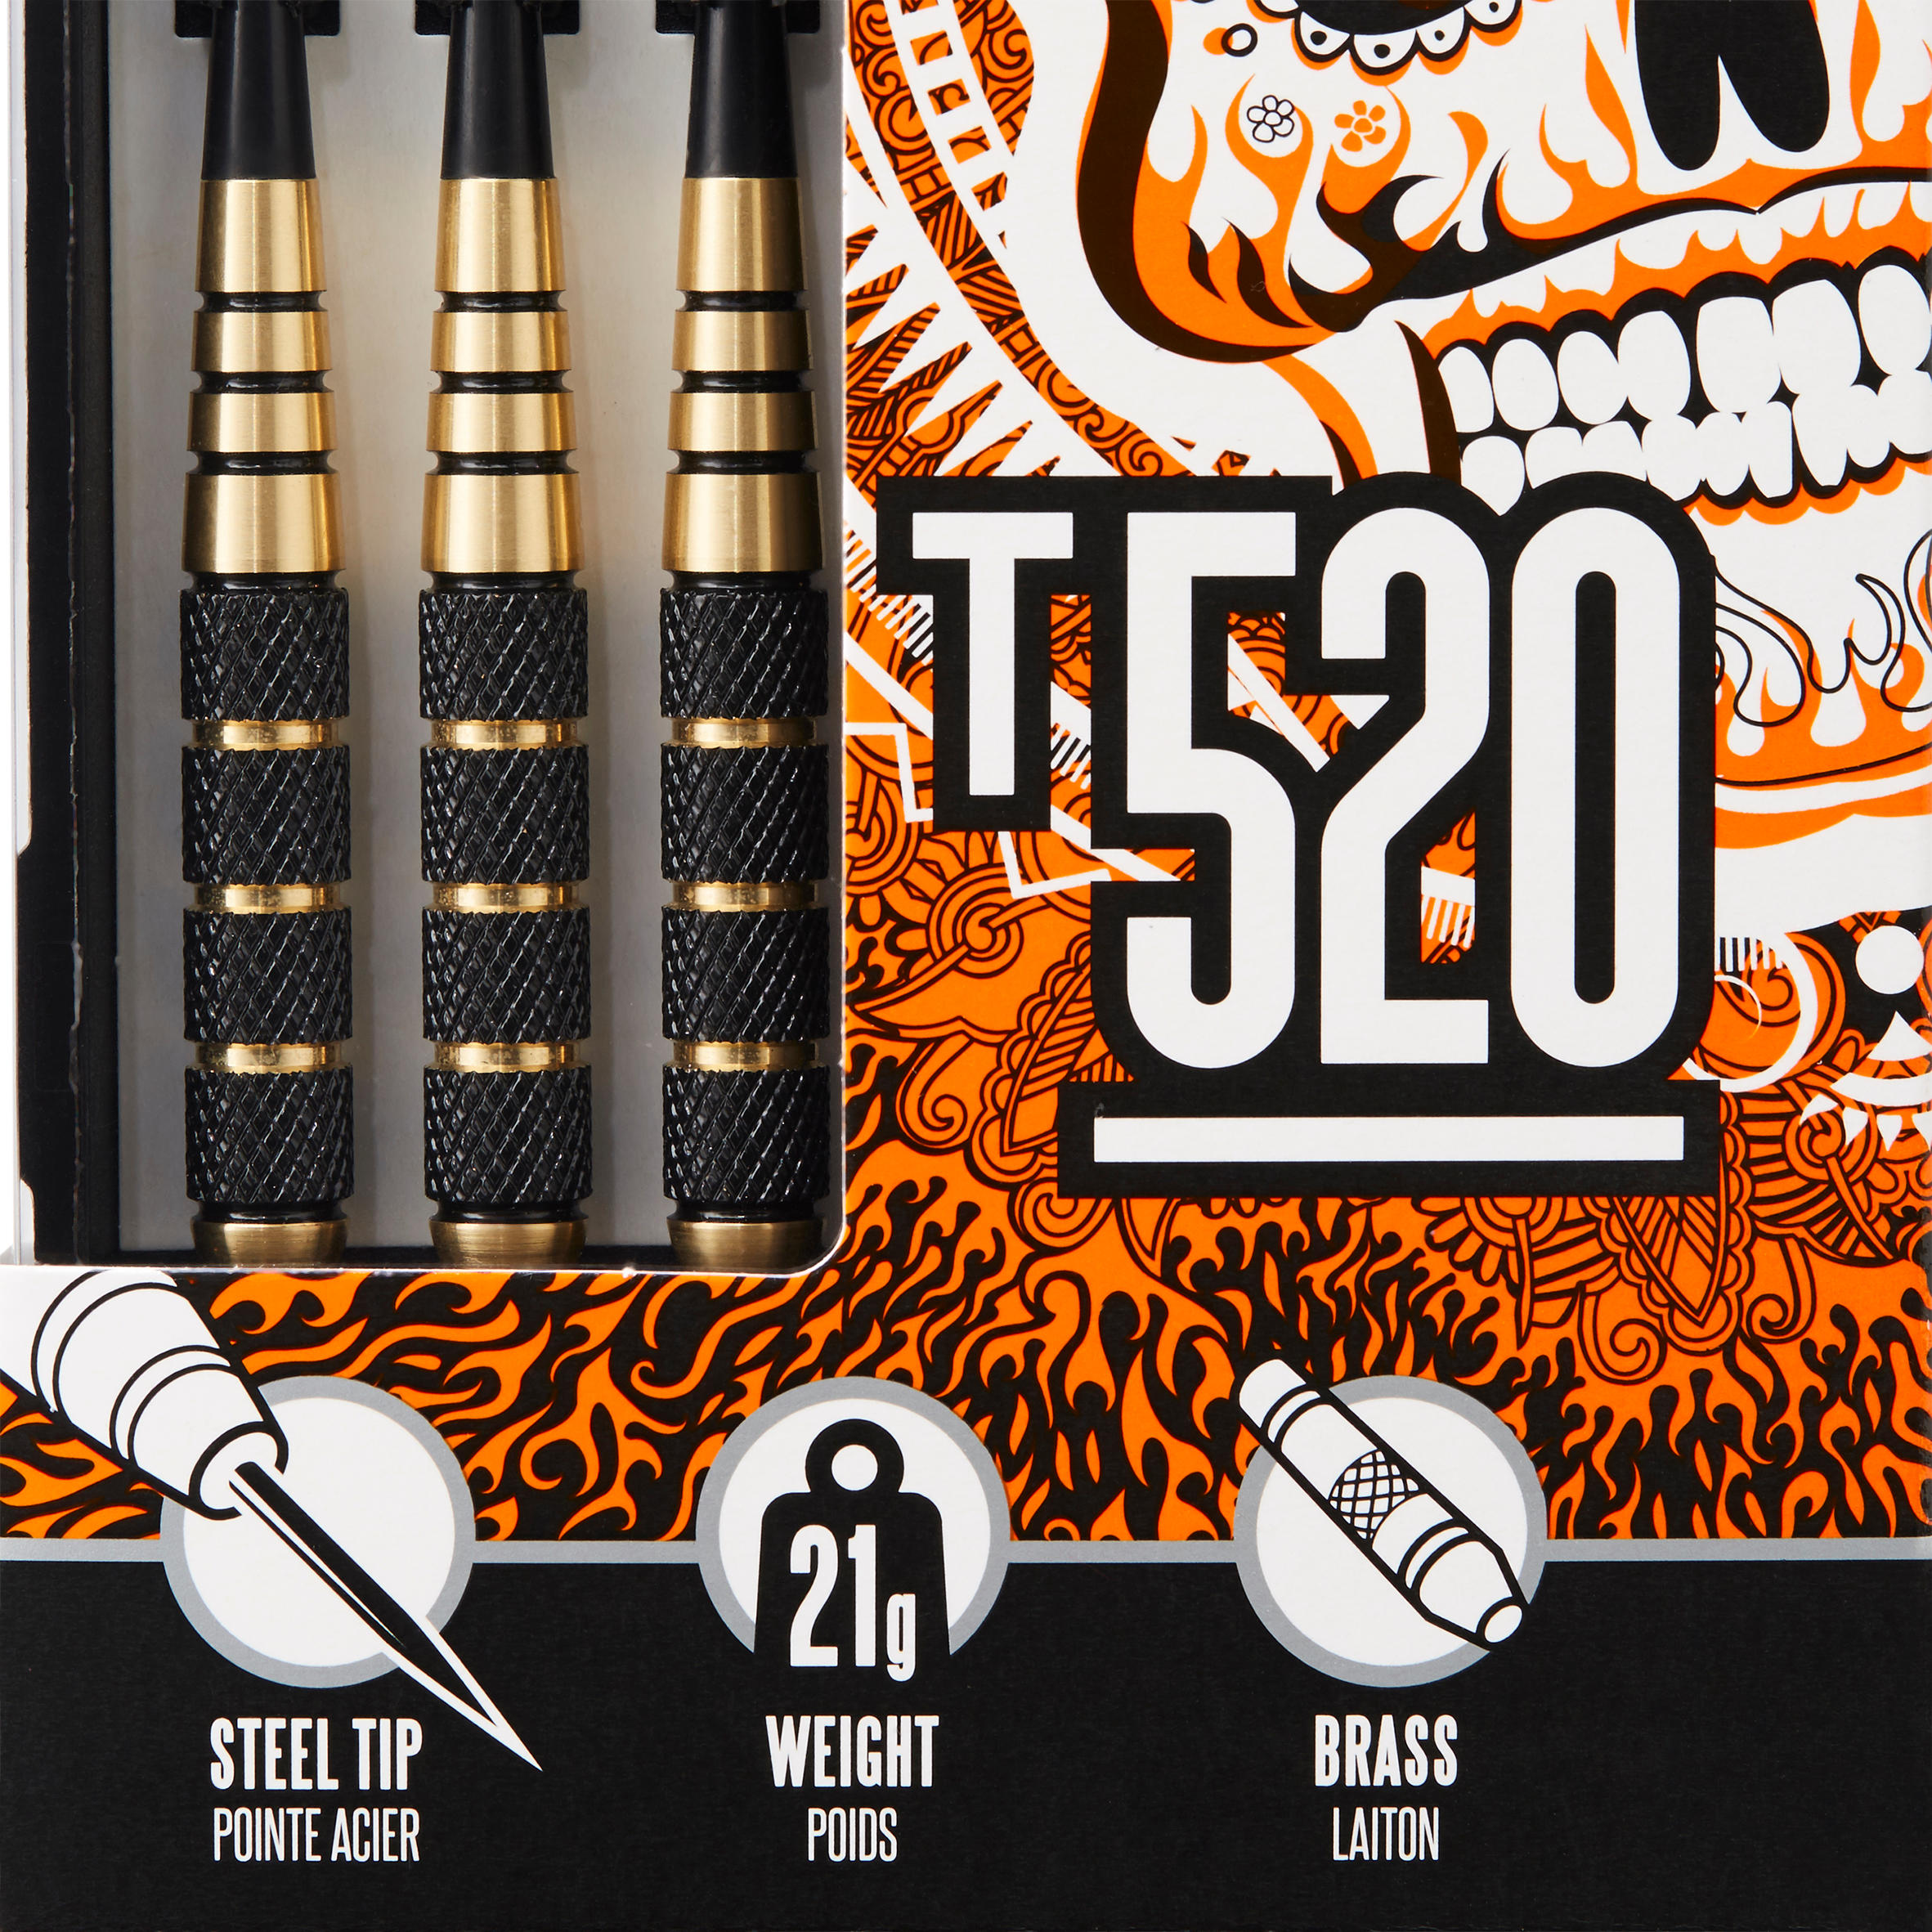 T520 Steel-Tipped Darts Tri-Pack - CANAVERAL